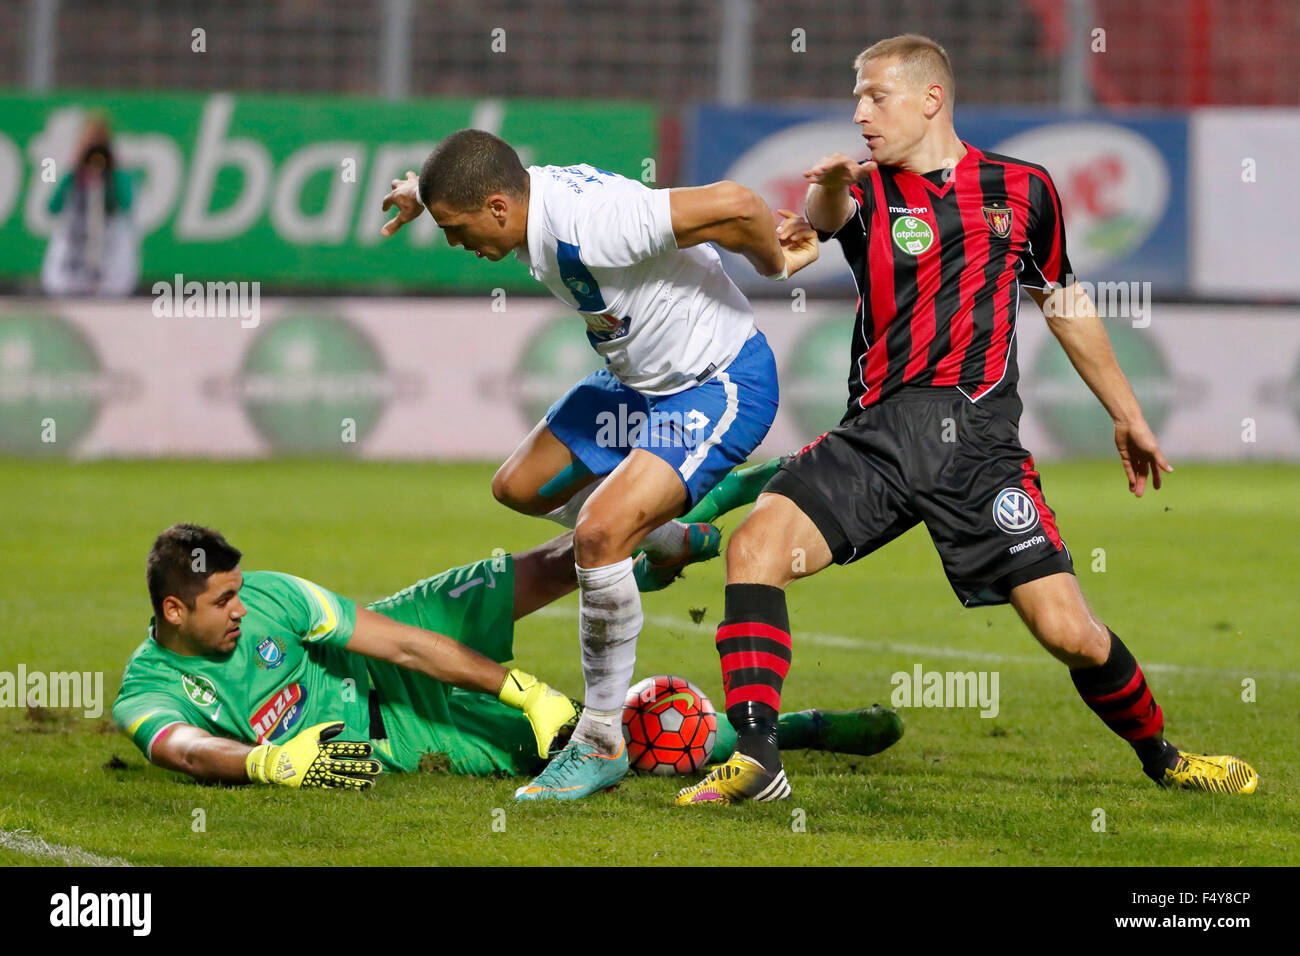 BUDAPEST, HUNGARY - OCTOBER 24, 2015: Lajos Hegedus of MTK (l) tries to get the ball next to Myke Bouard Ramos and Djordje Kamber (r) of Honved during MTK vs. Honved OTP Bank League football match in Illovszky Stadium. Credit:  Laszlo Szirtesi/Alamy Live News Stock Photo